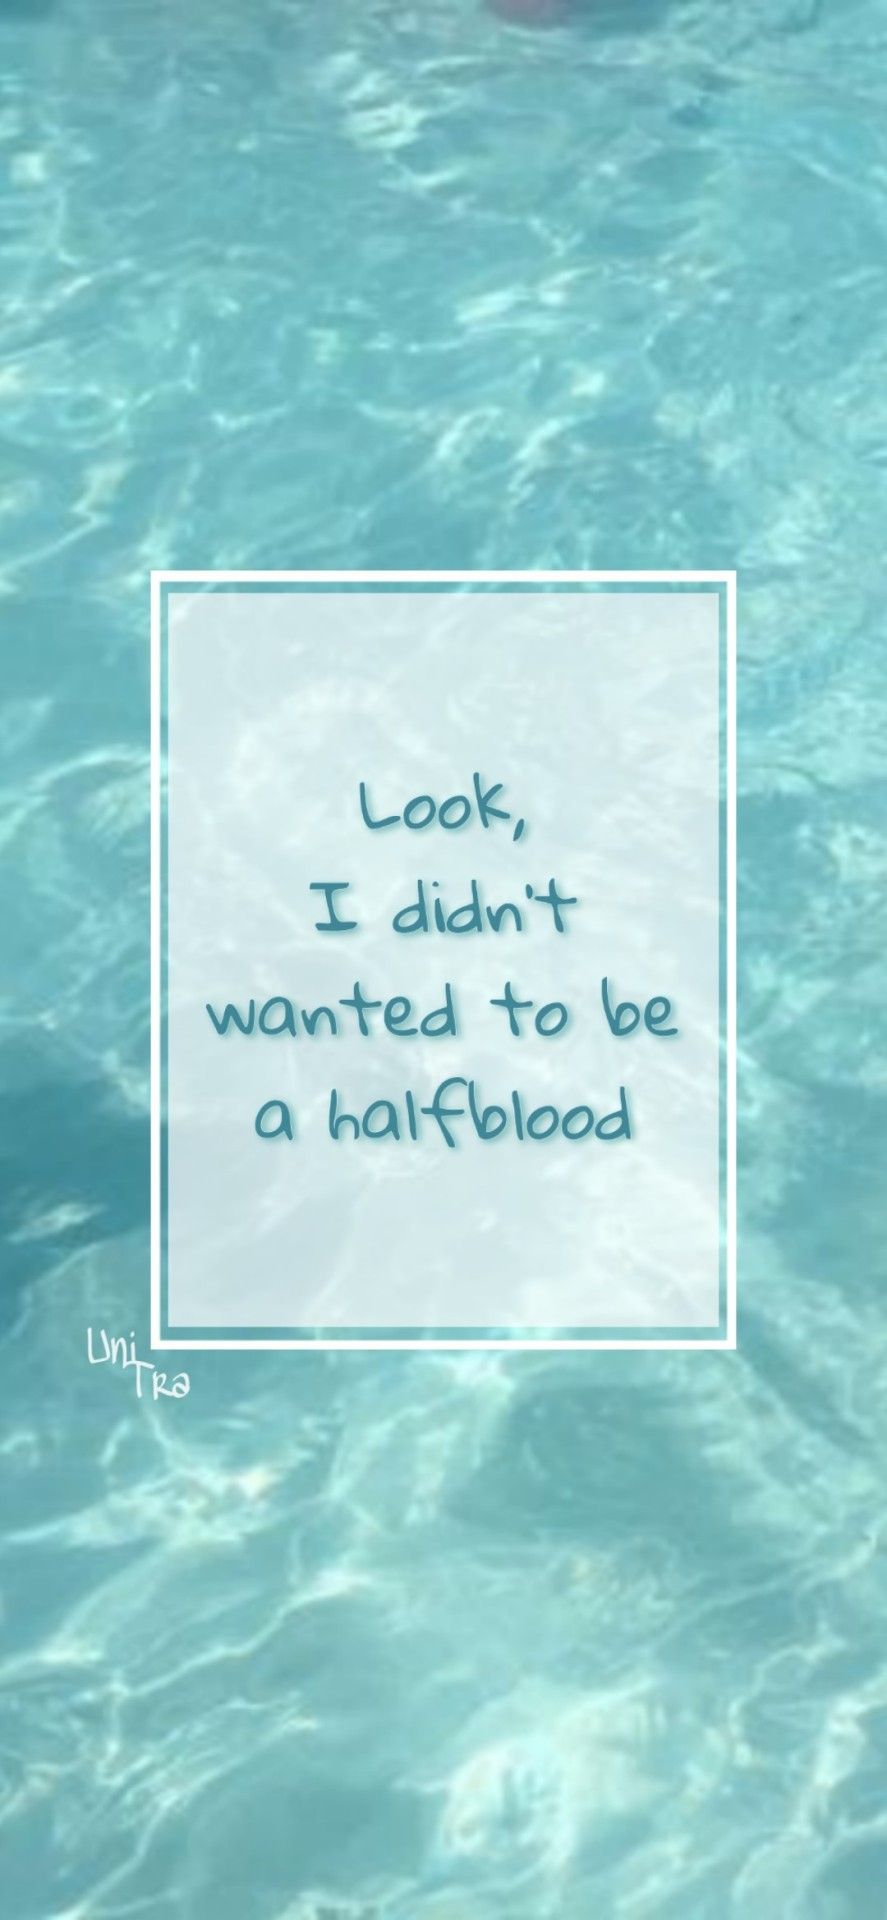 Iphone wallpaper half blood quote - Teal, turquoise